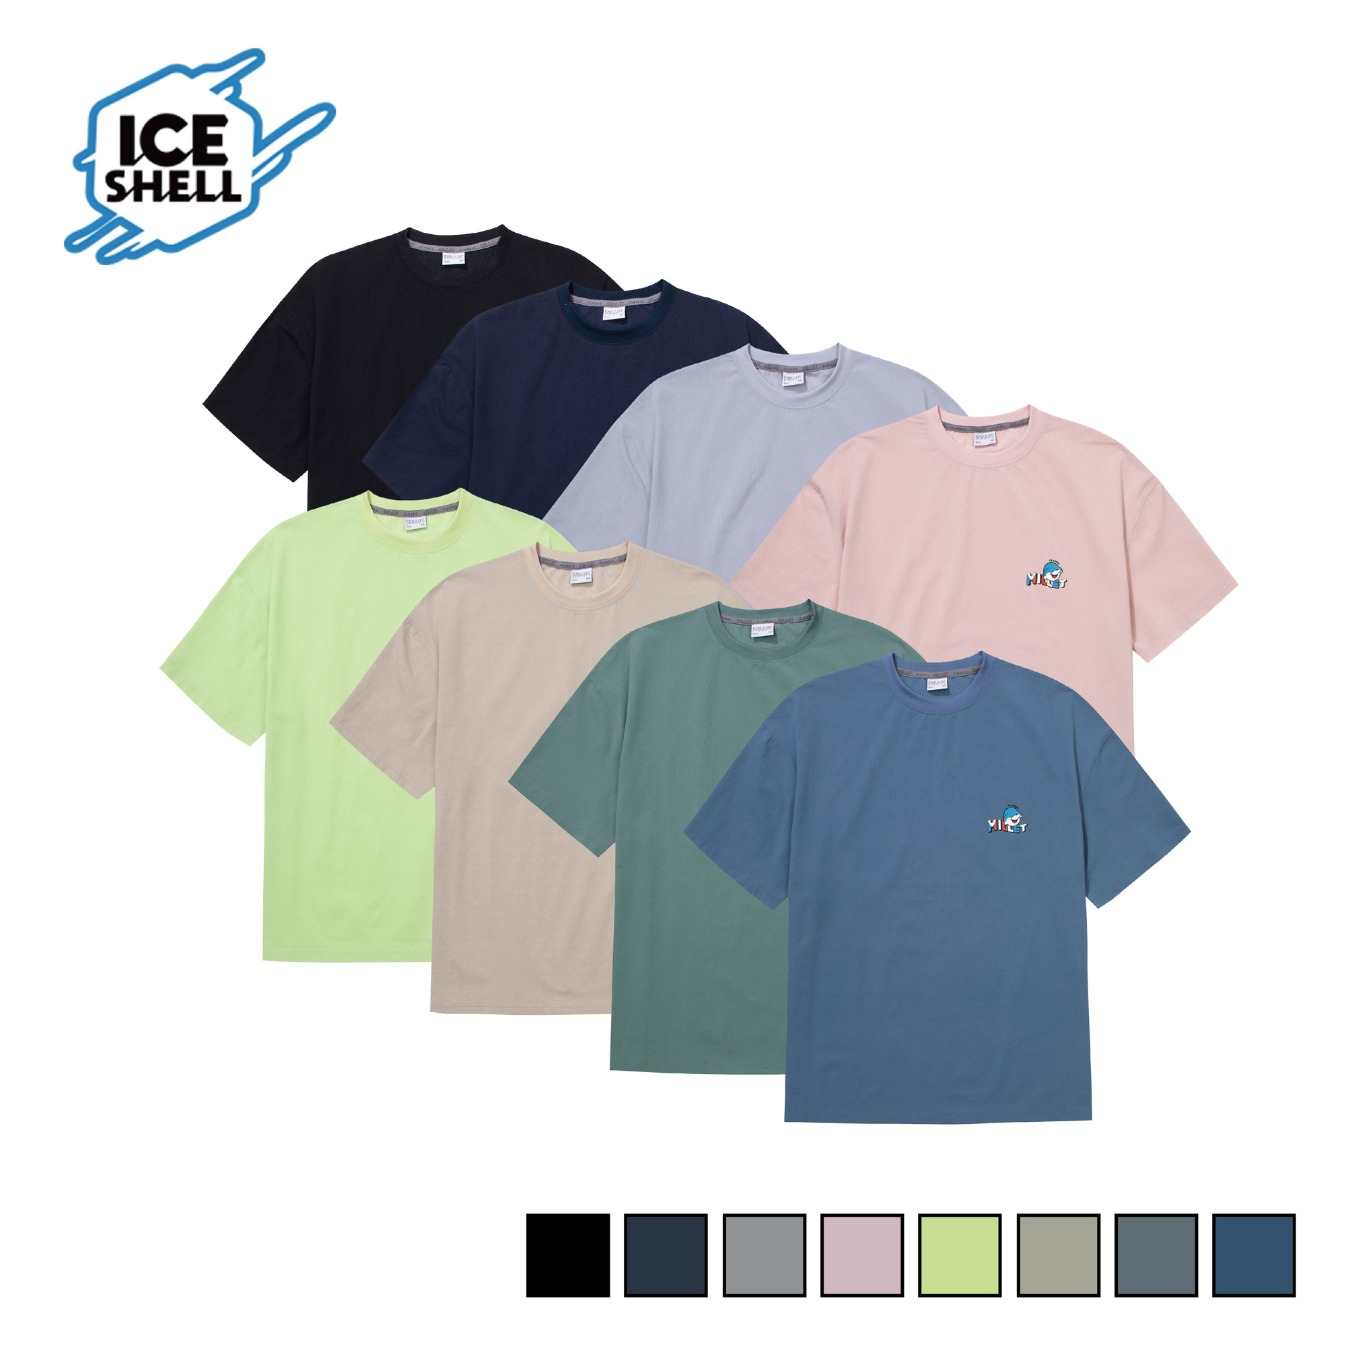 MCC MIX LOGO ICE SHELL T-SHIRTS_OVER FIT